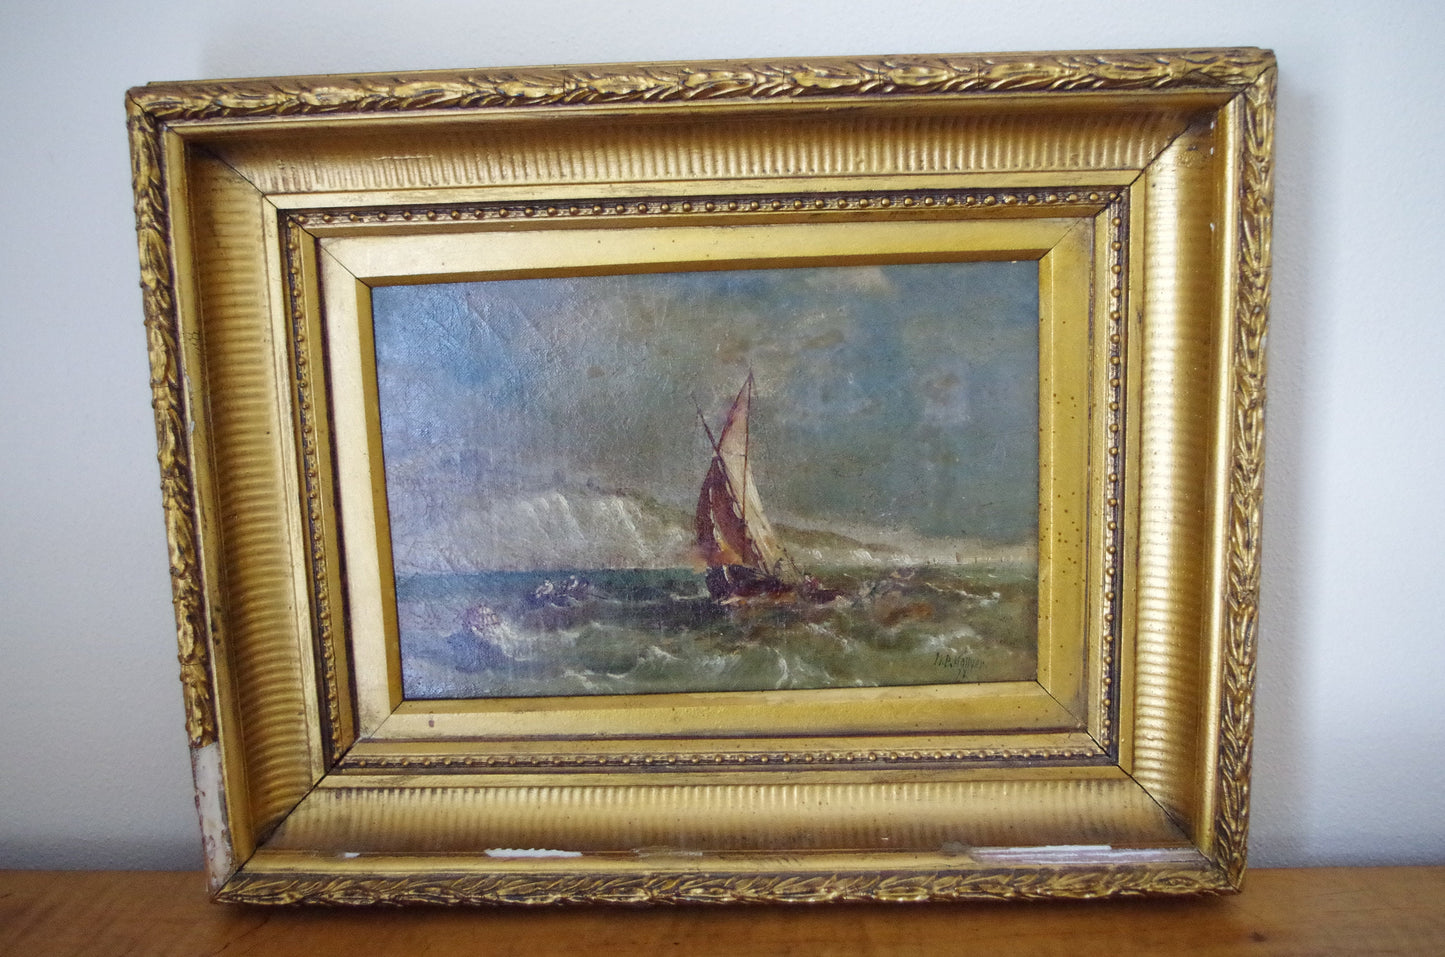 William Perring Hollyer (1834-1922) Nautical Scene Oil Painting- Sailboats